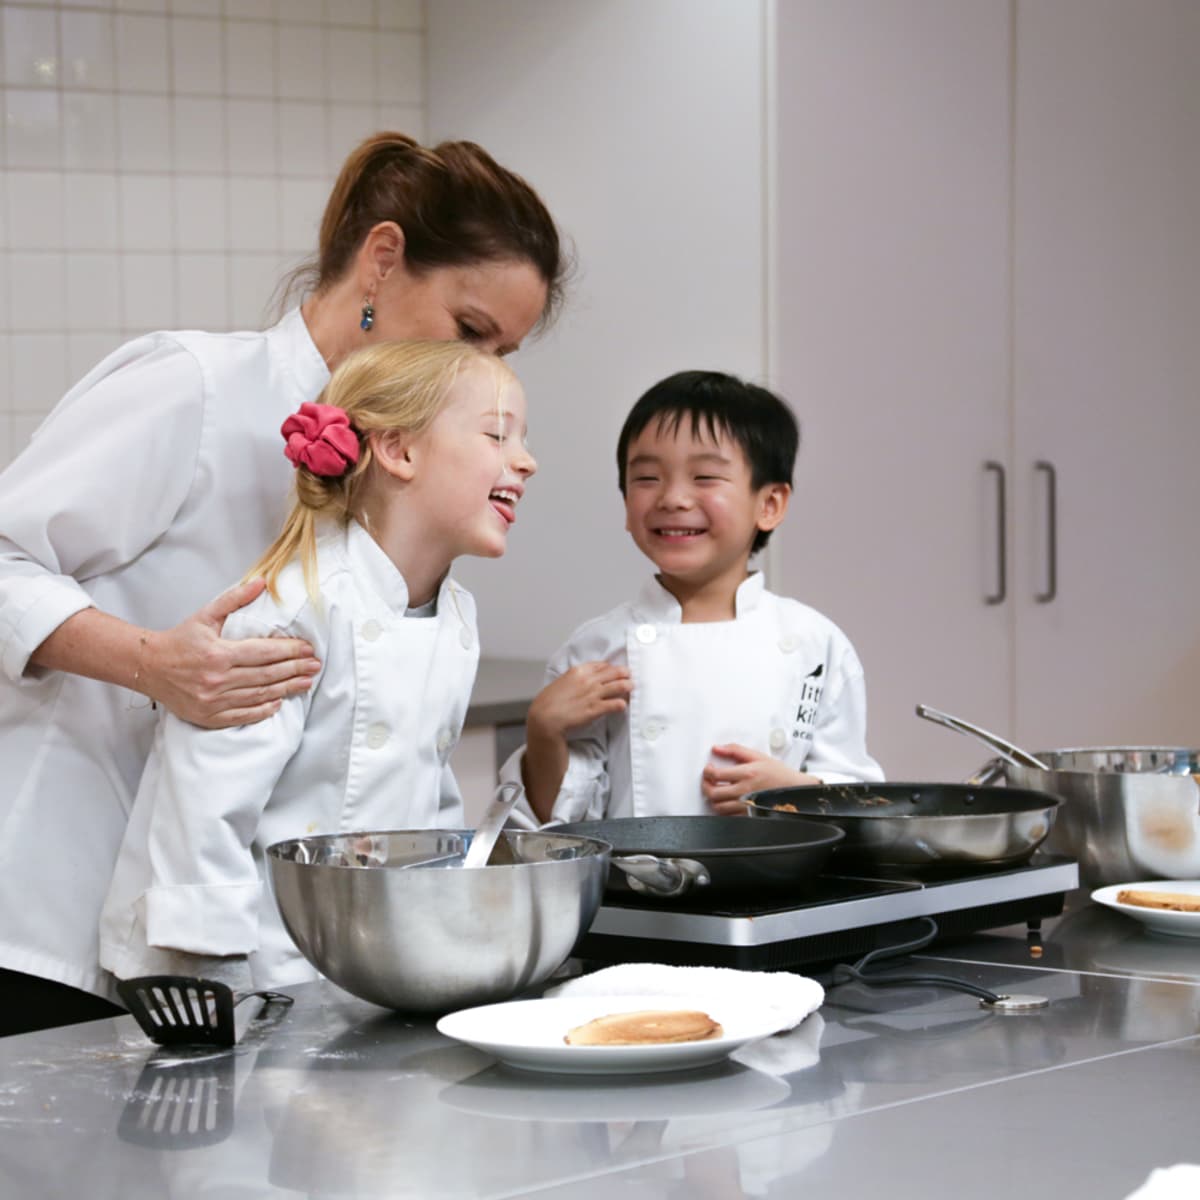 Little Kitchen Academy Vancouver: Cooking School for Kids